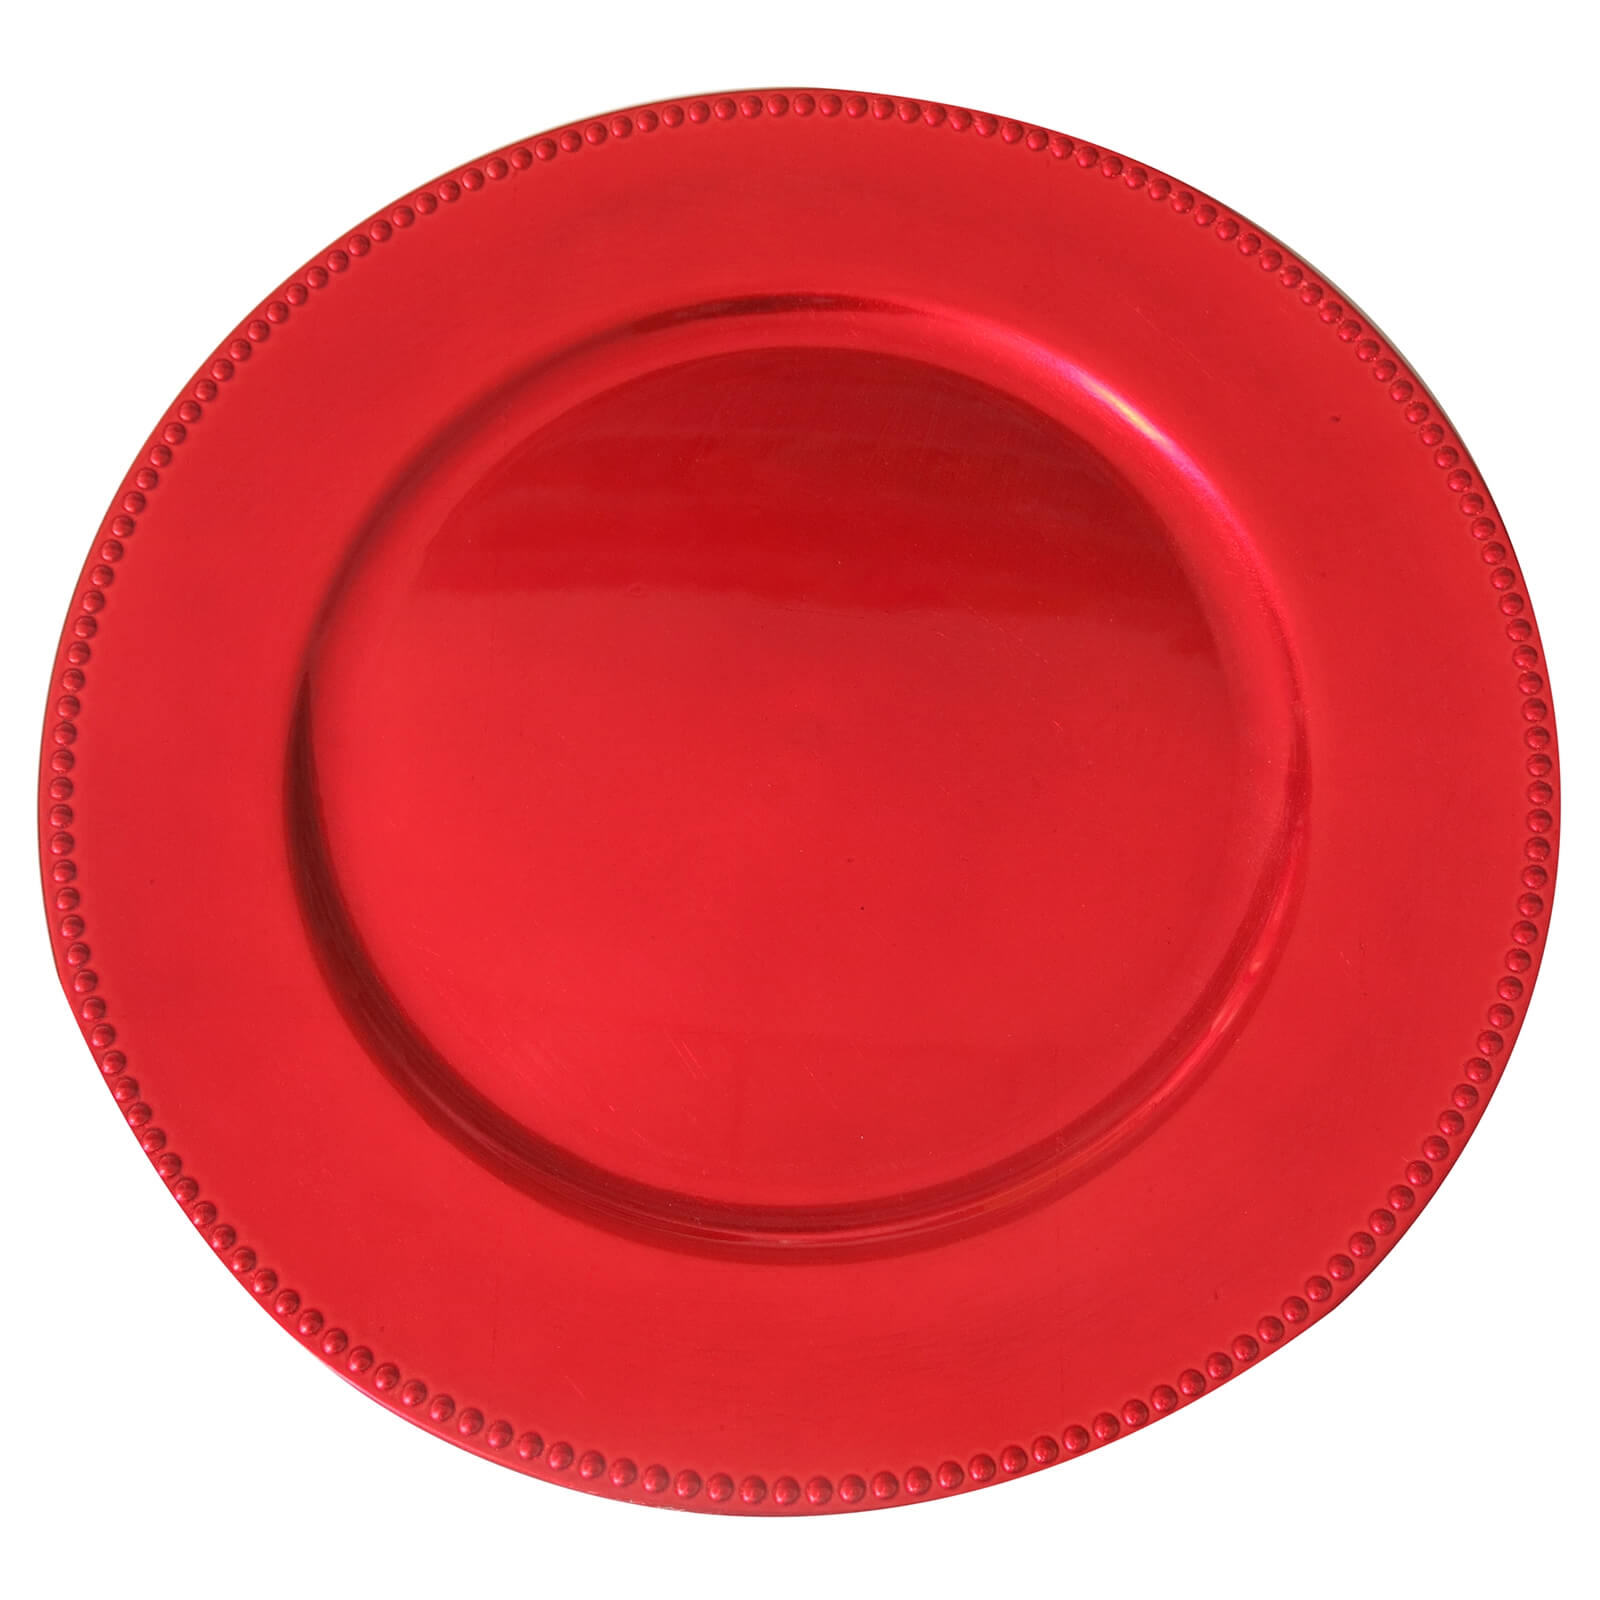 Photo of Charger Plate - Red